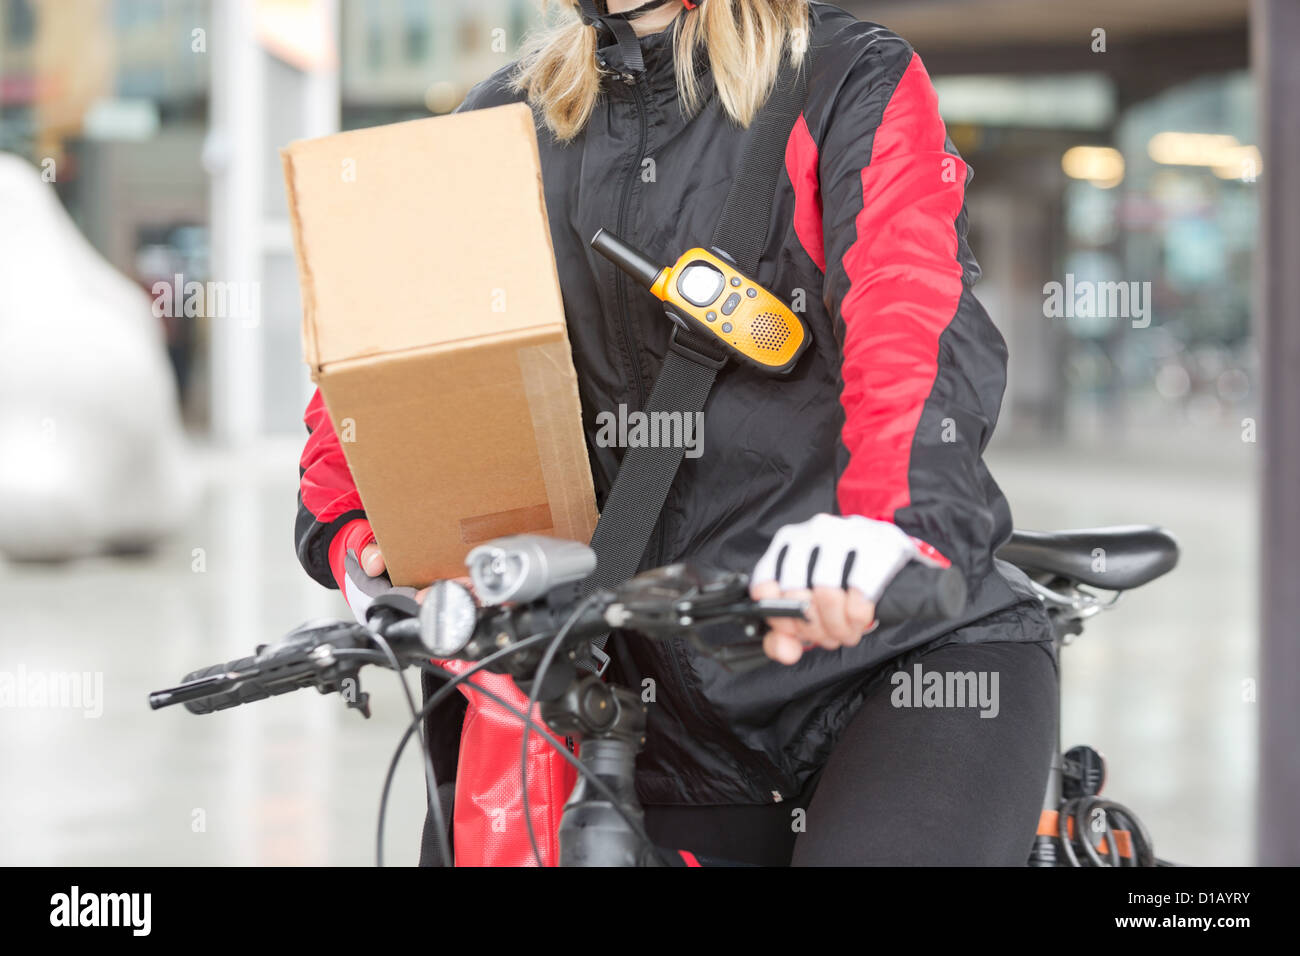 Female Cyclist With Cardboard Box And Courier Bag On Street Stock Photo